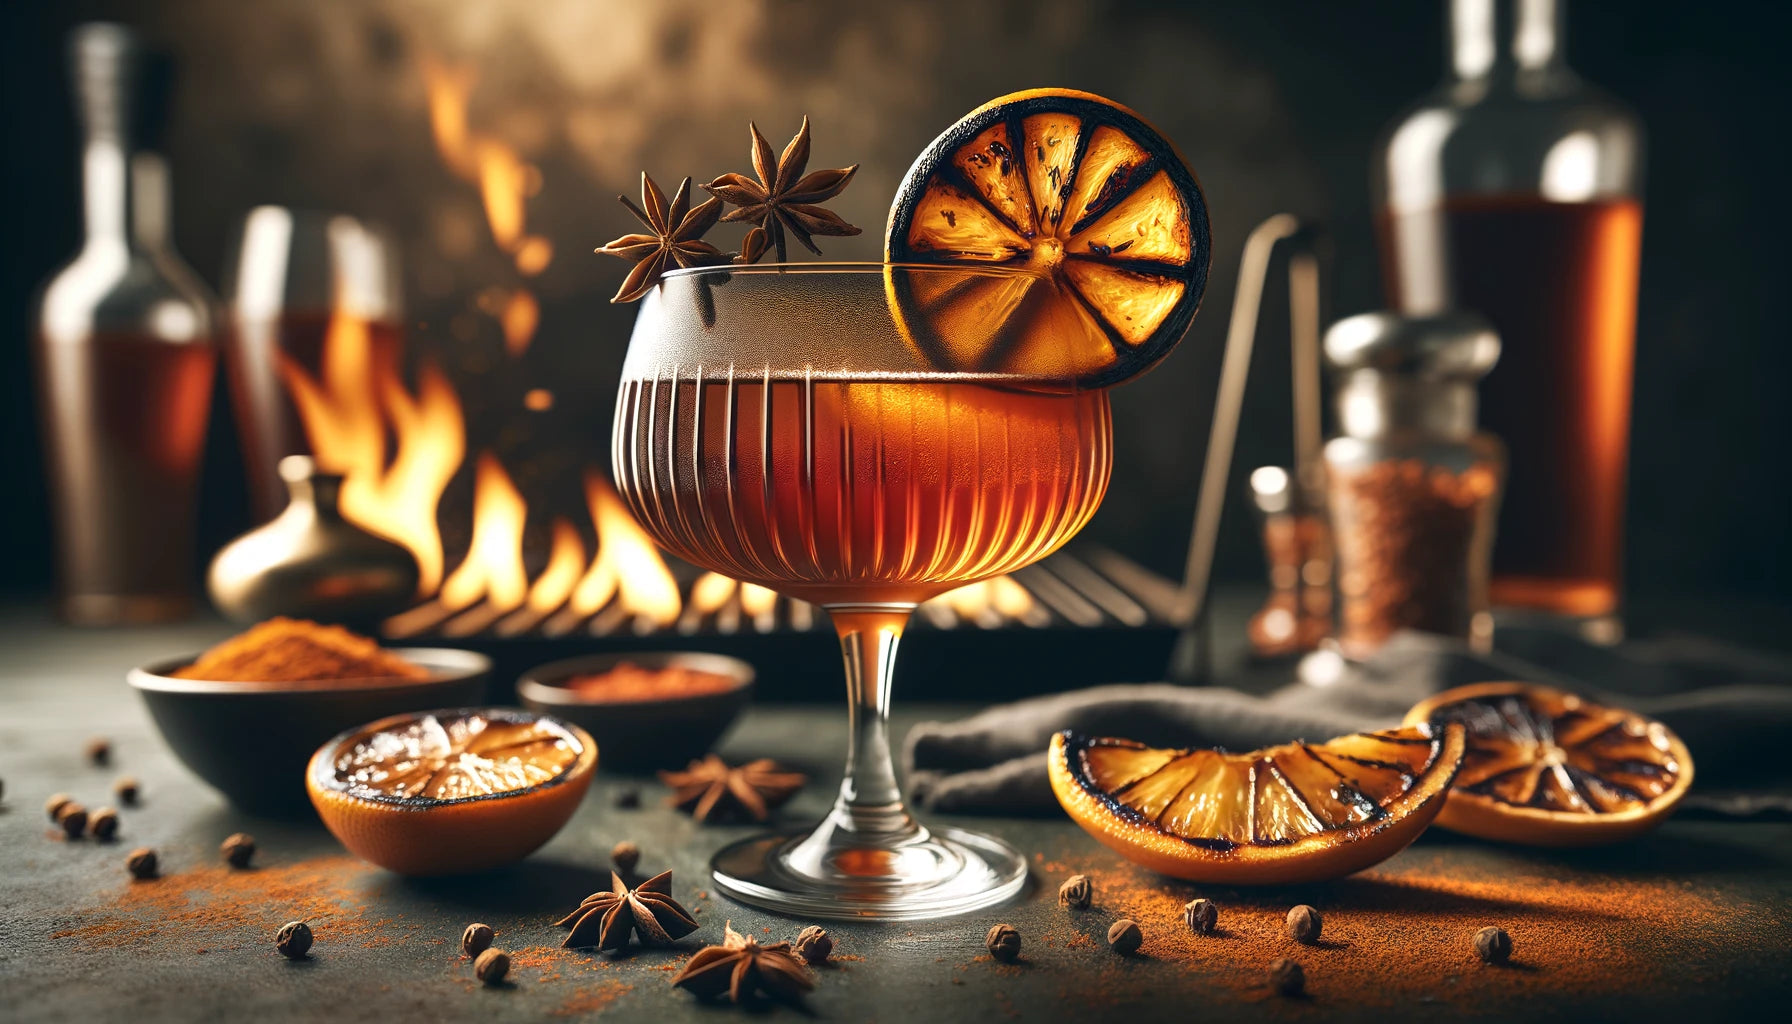 Grilled Spiced Sidecar Cocktail Recipe on Arteflame Grill